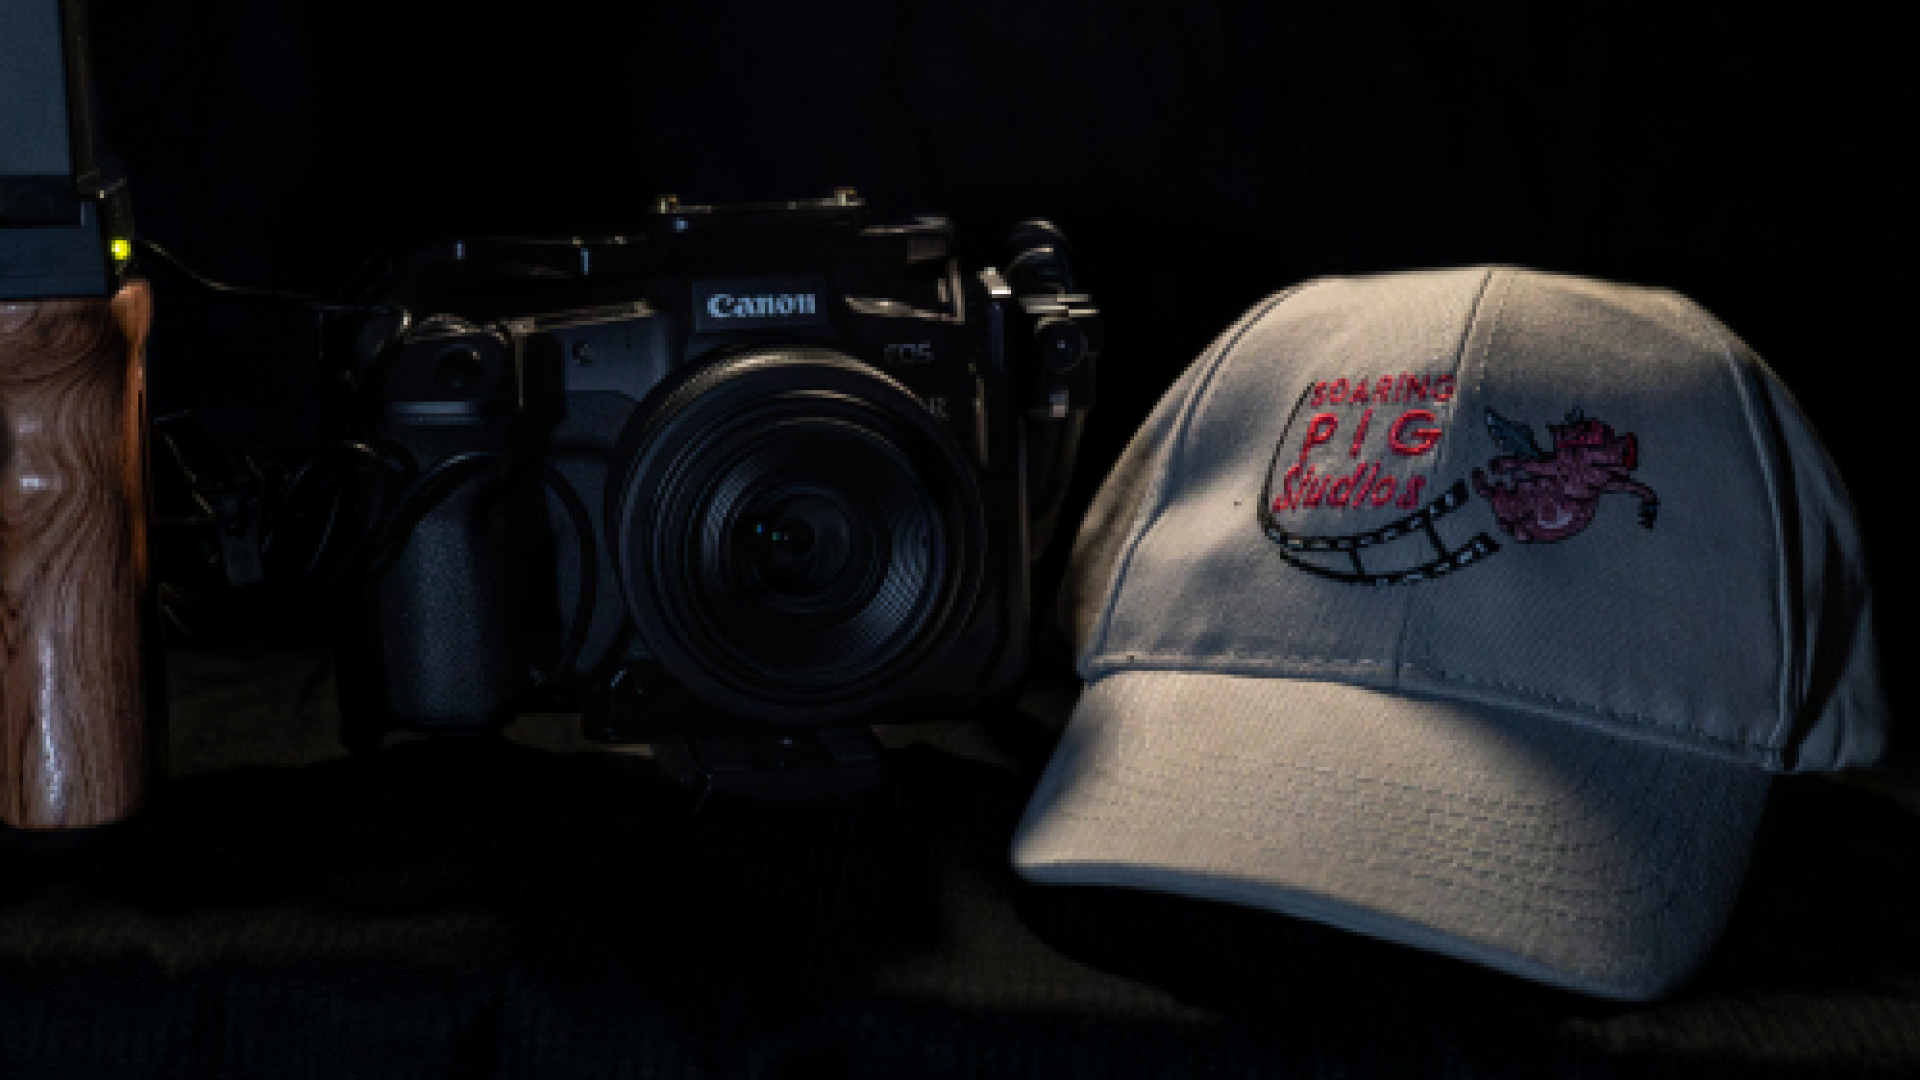 video production services - Soaring Pig Studios Hat and Camera